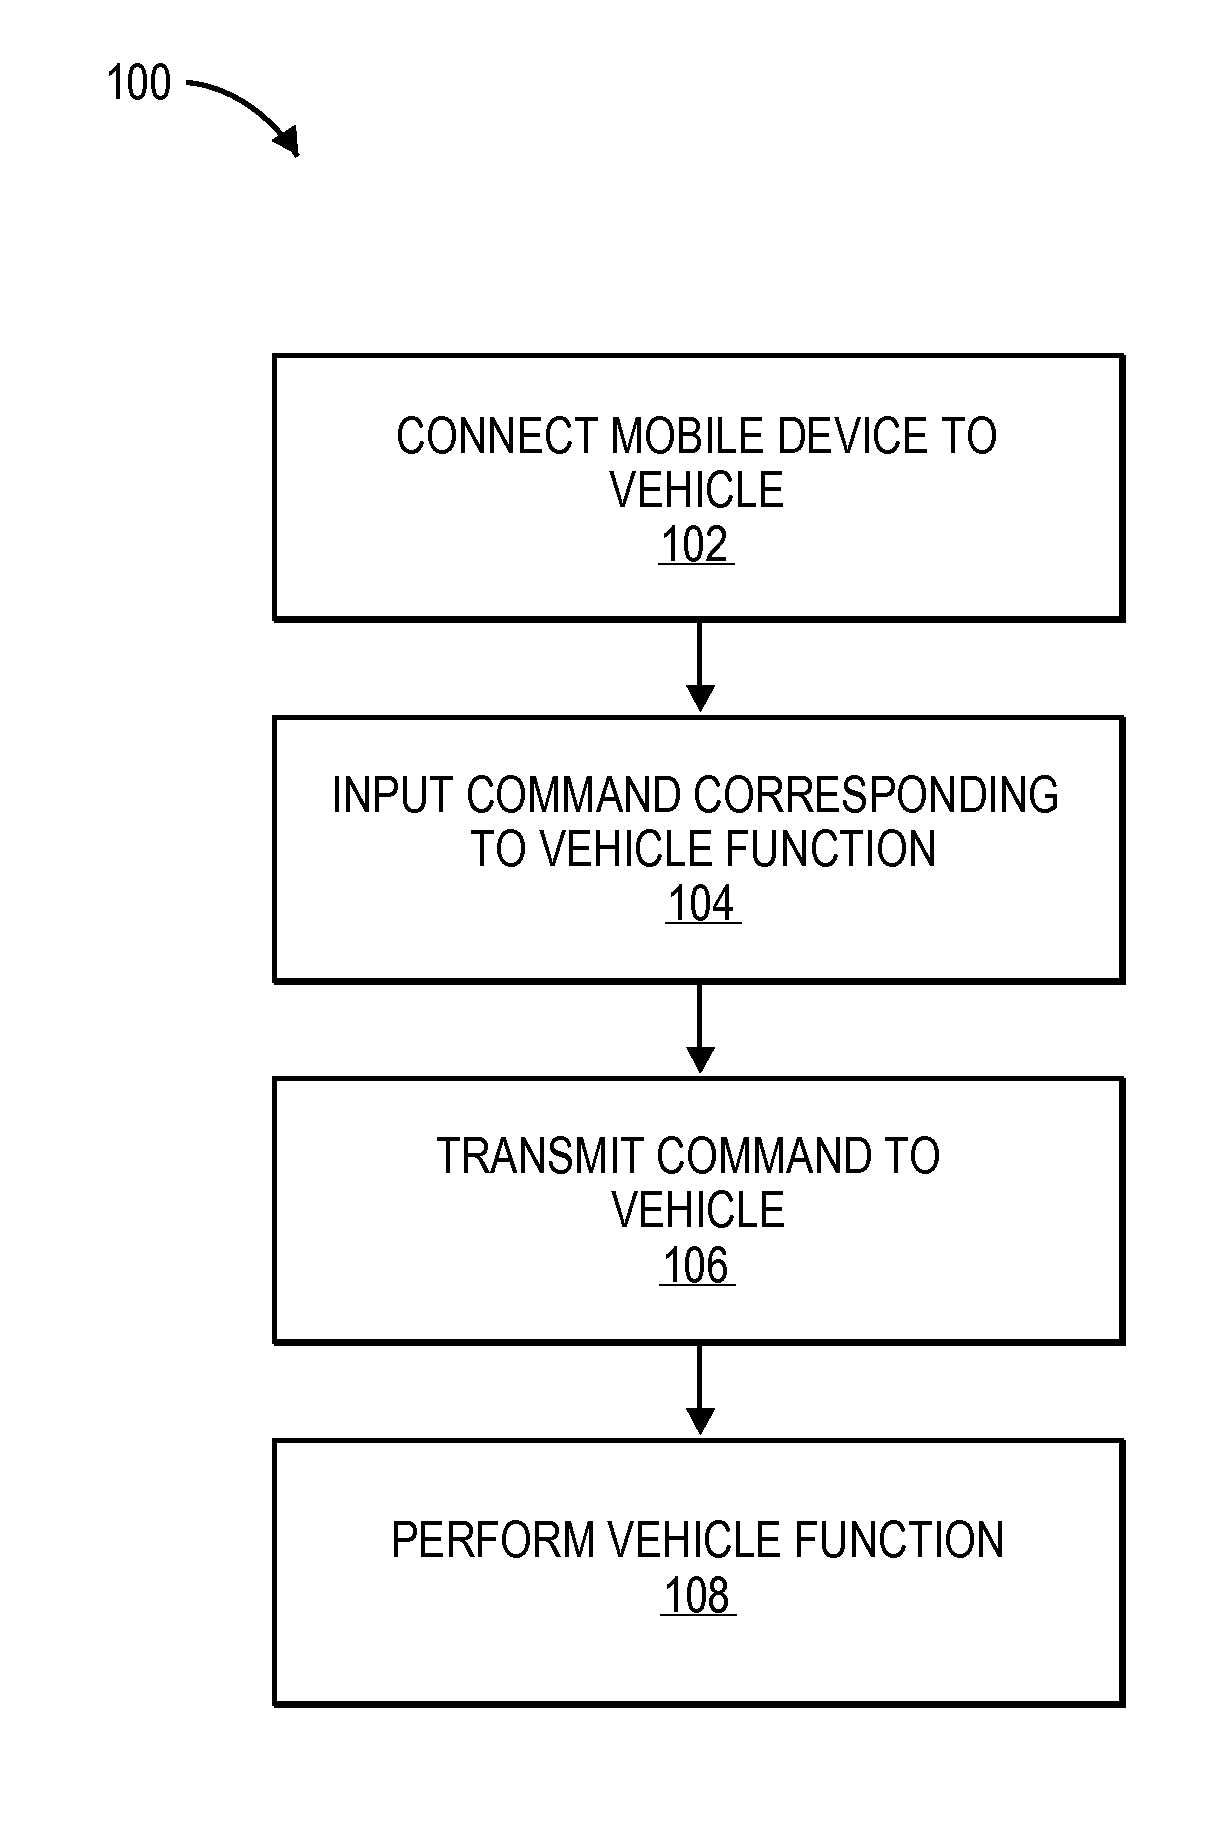 Emergency vehicle control application